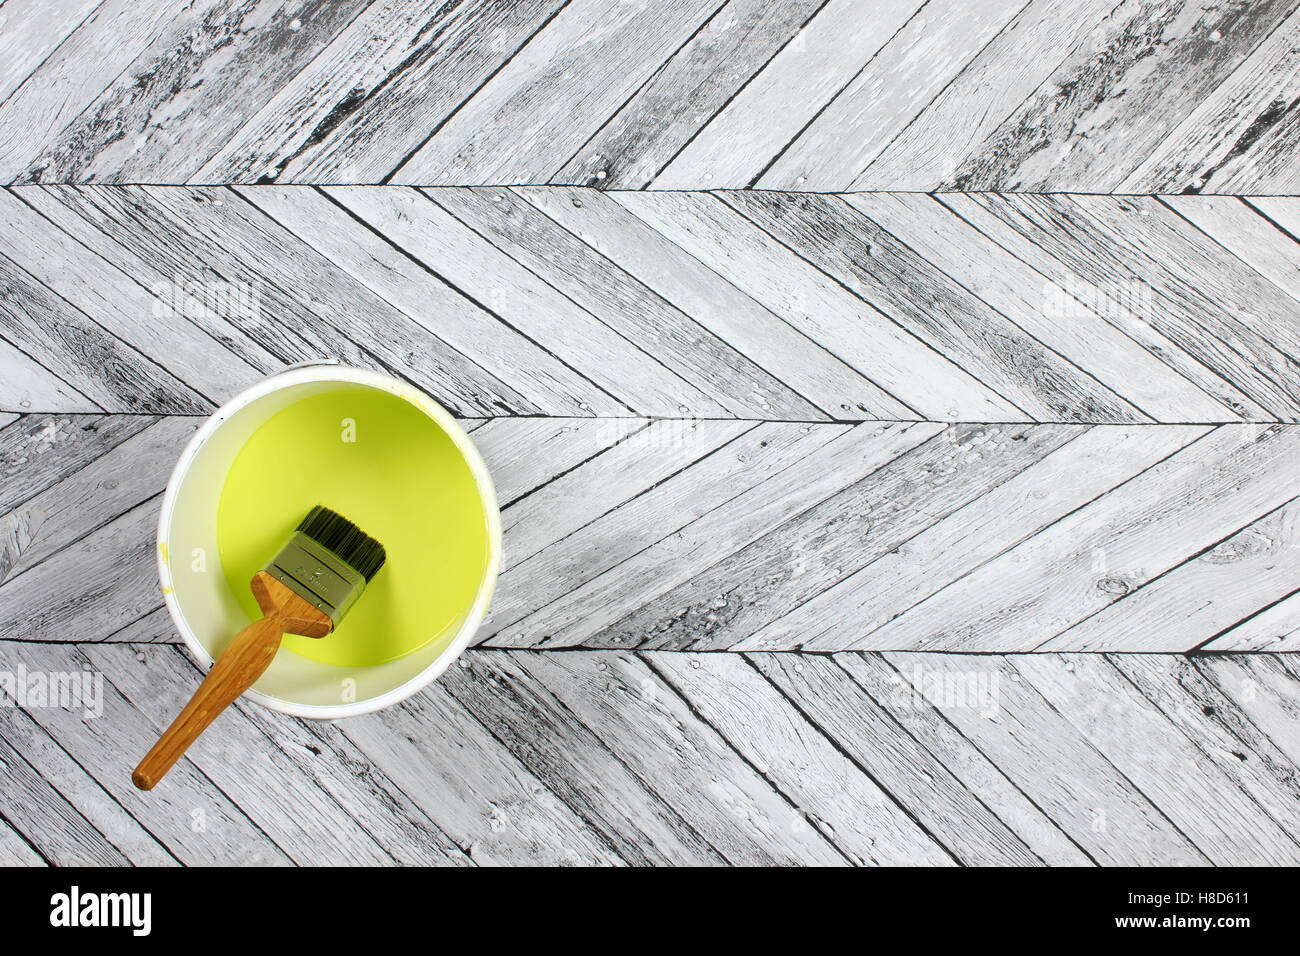 Paintbrush sitting in a white paint kettle filled with lime green paint on a grey and white herringbone style wood floor Stock Photo